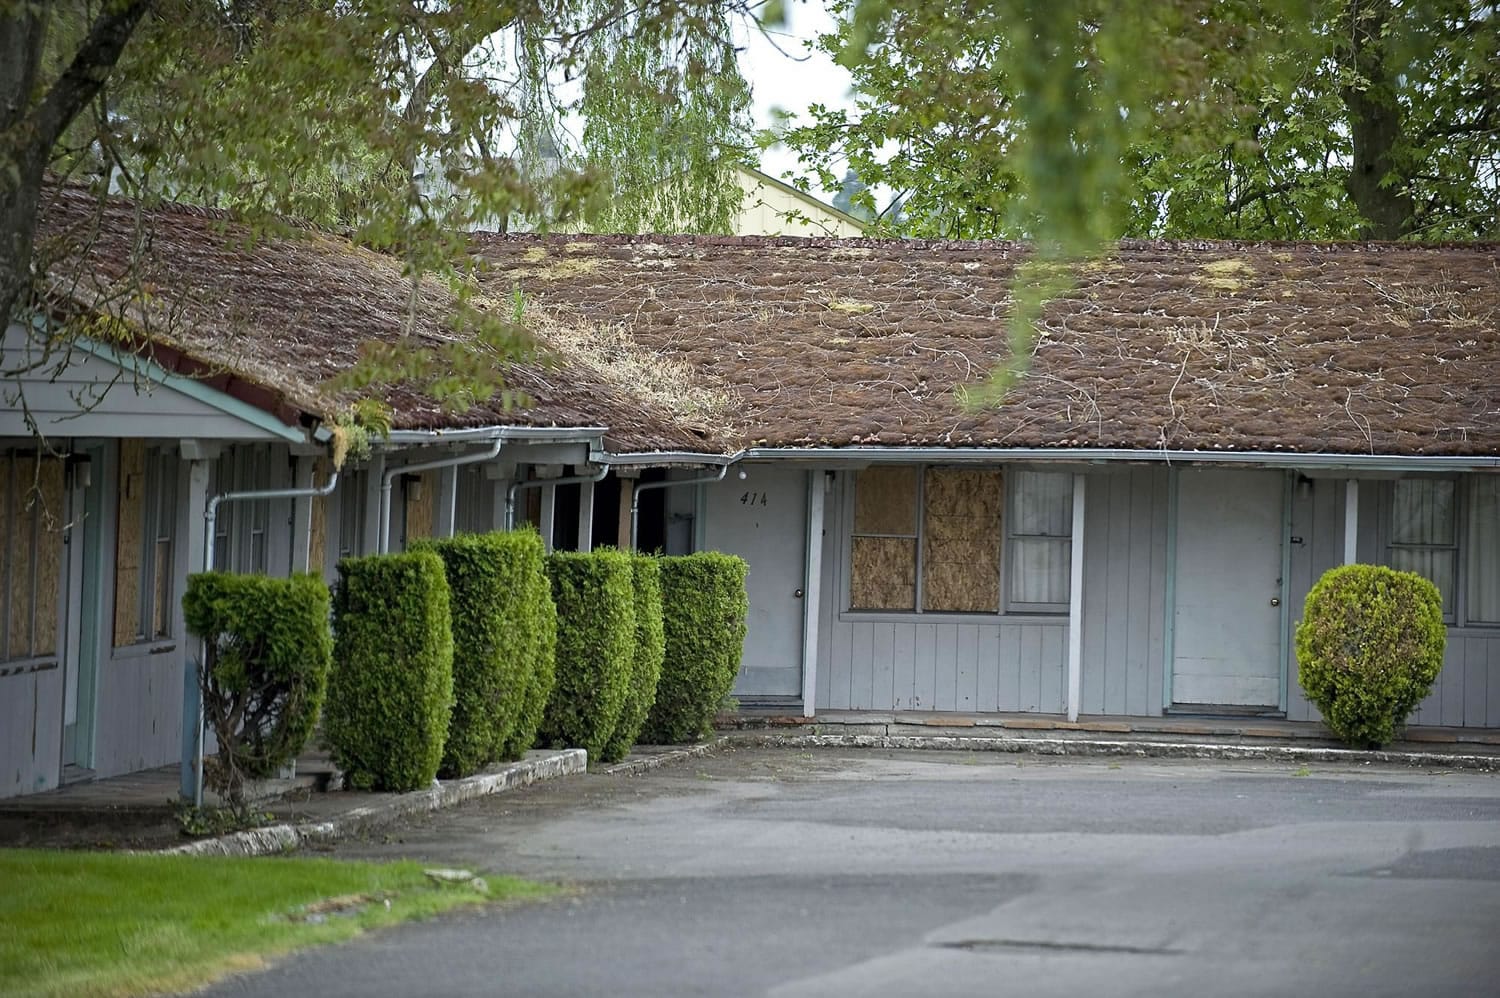 Clark County Commissioner Marc Boldt wants the county to pursue condemning and demolishing two boarded-up buildings located along Highway 99 on the Value Motel site. Boldt said the county has asked owner Milton O.